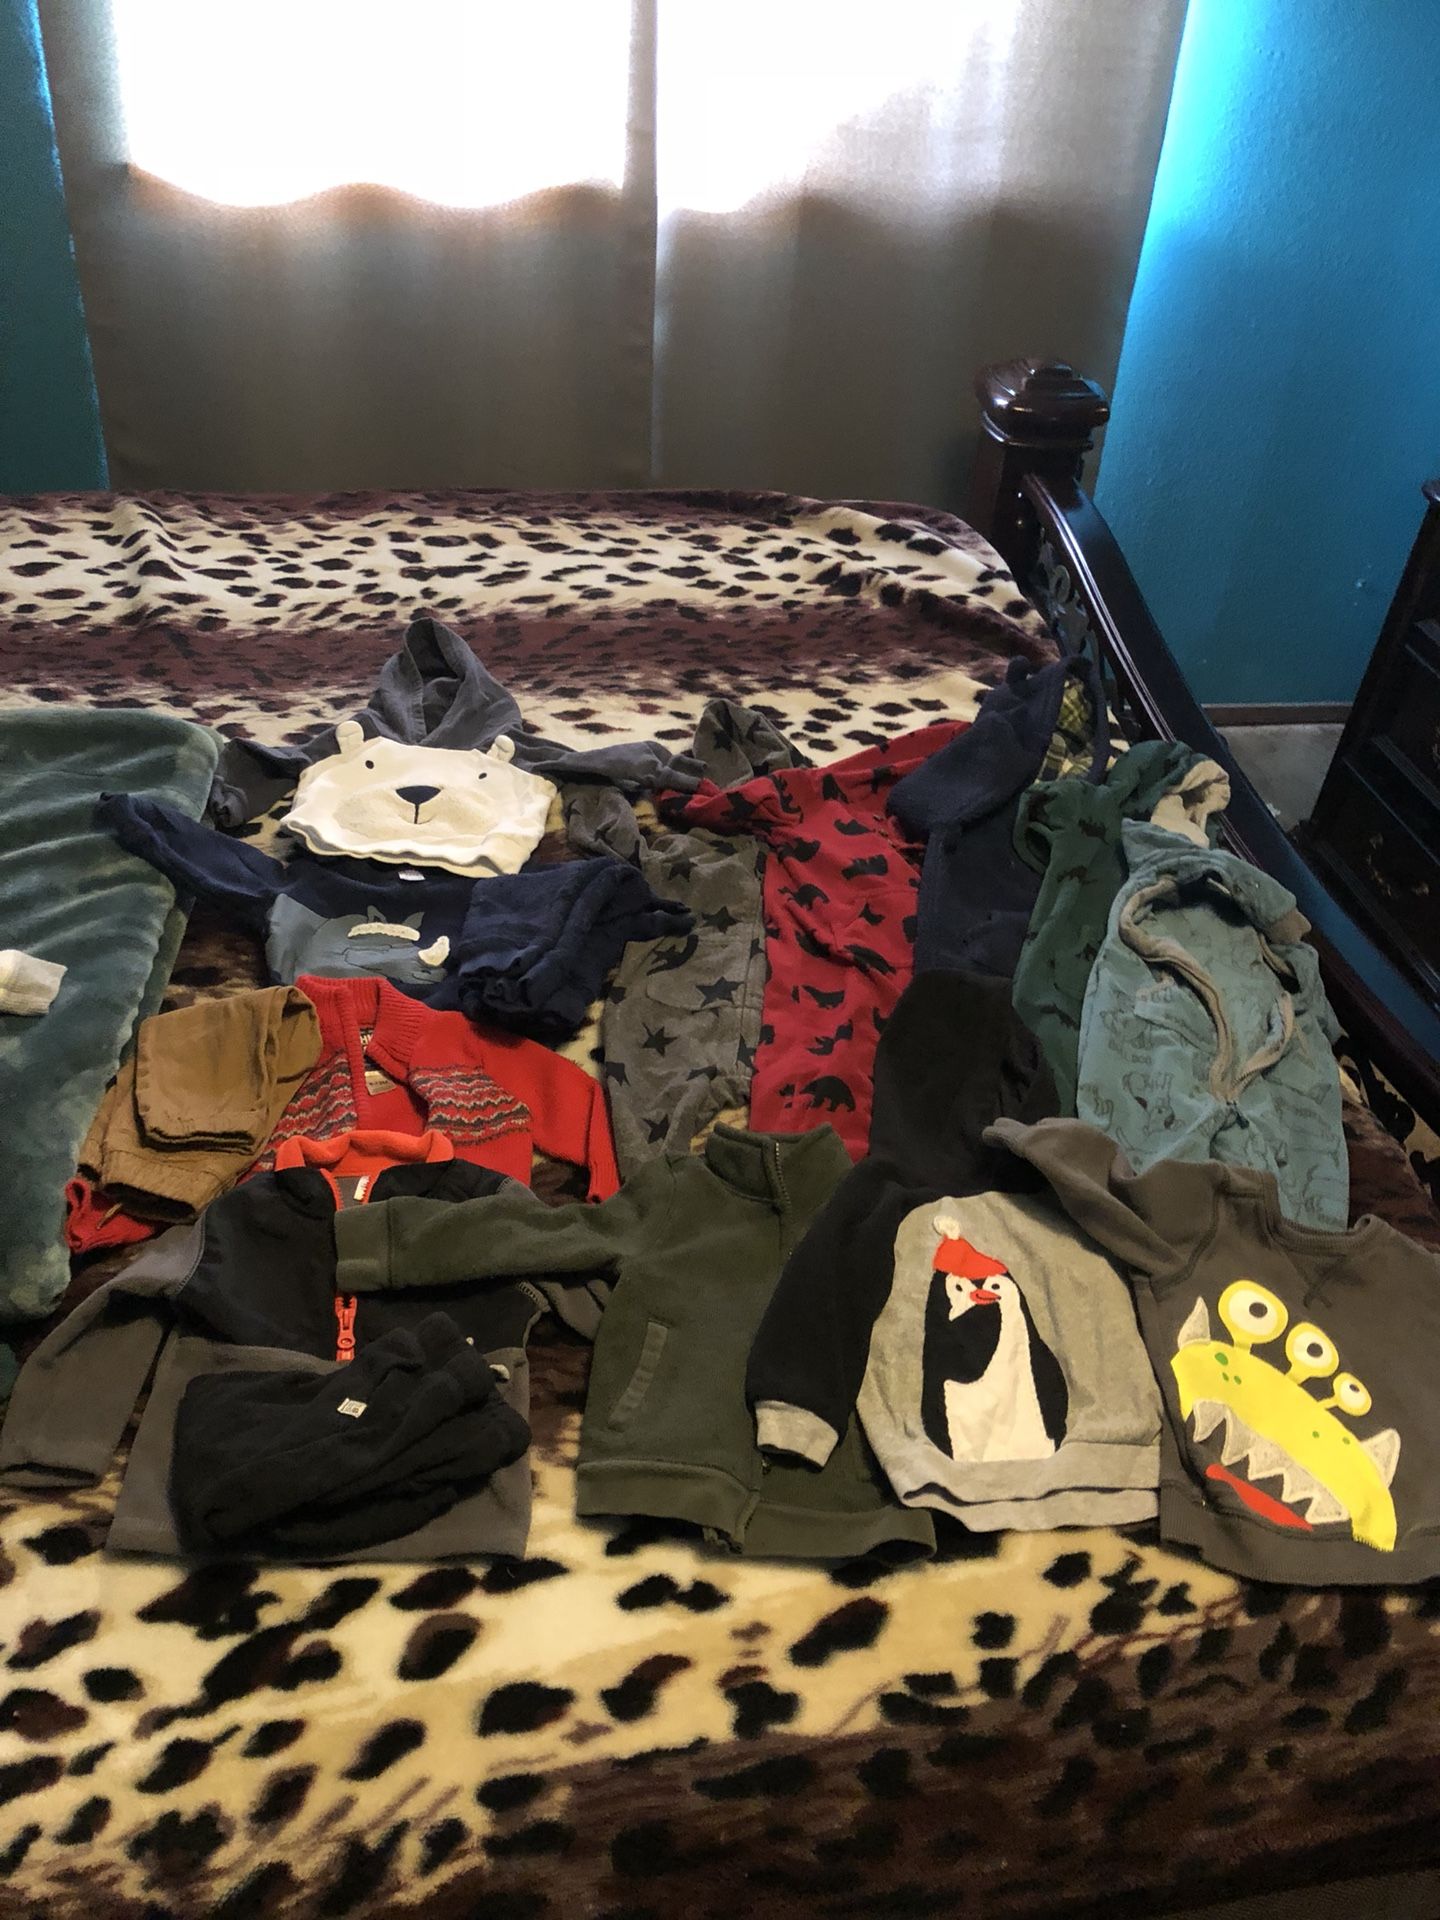 12 month baby boy clothes